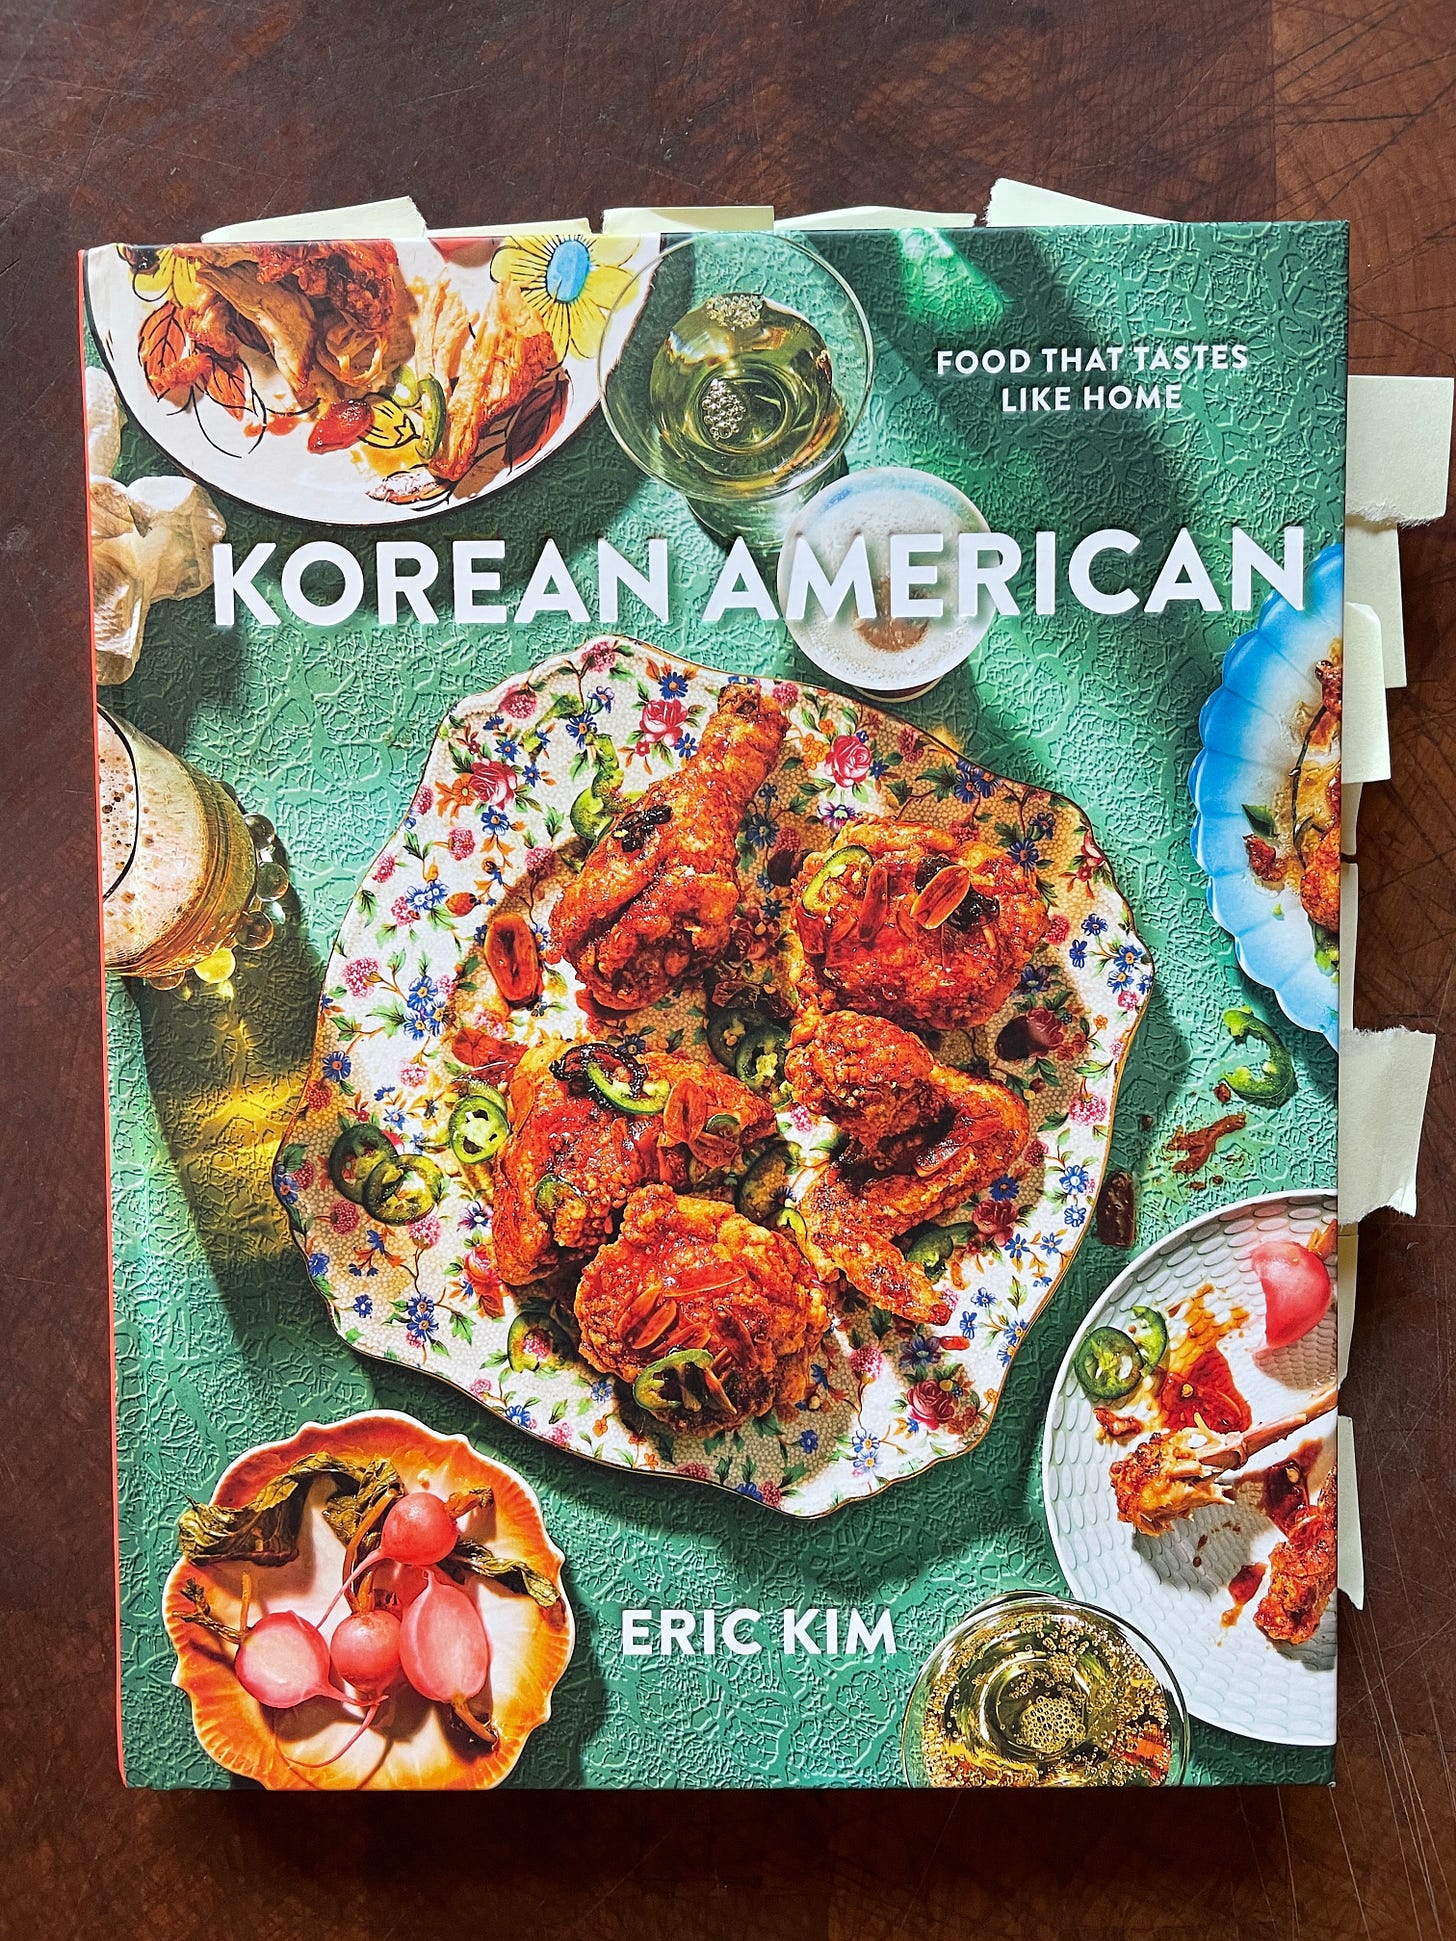 Image of a cookbook with text "Korean American: Food That Tastes Like Home" and a photo of fried chicken on the cover